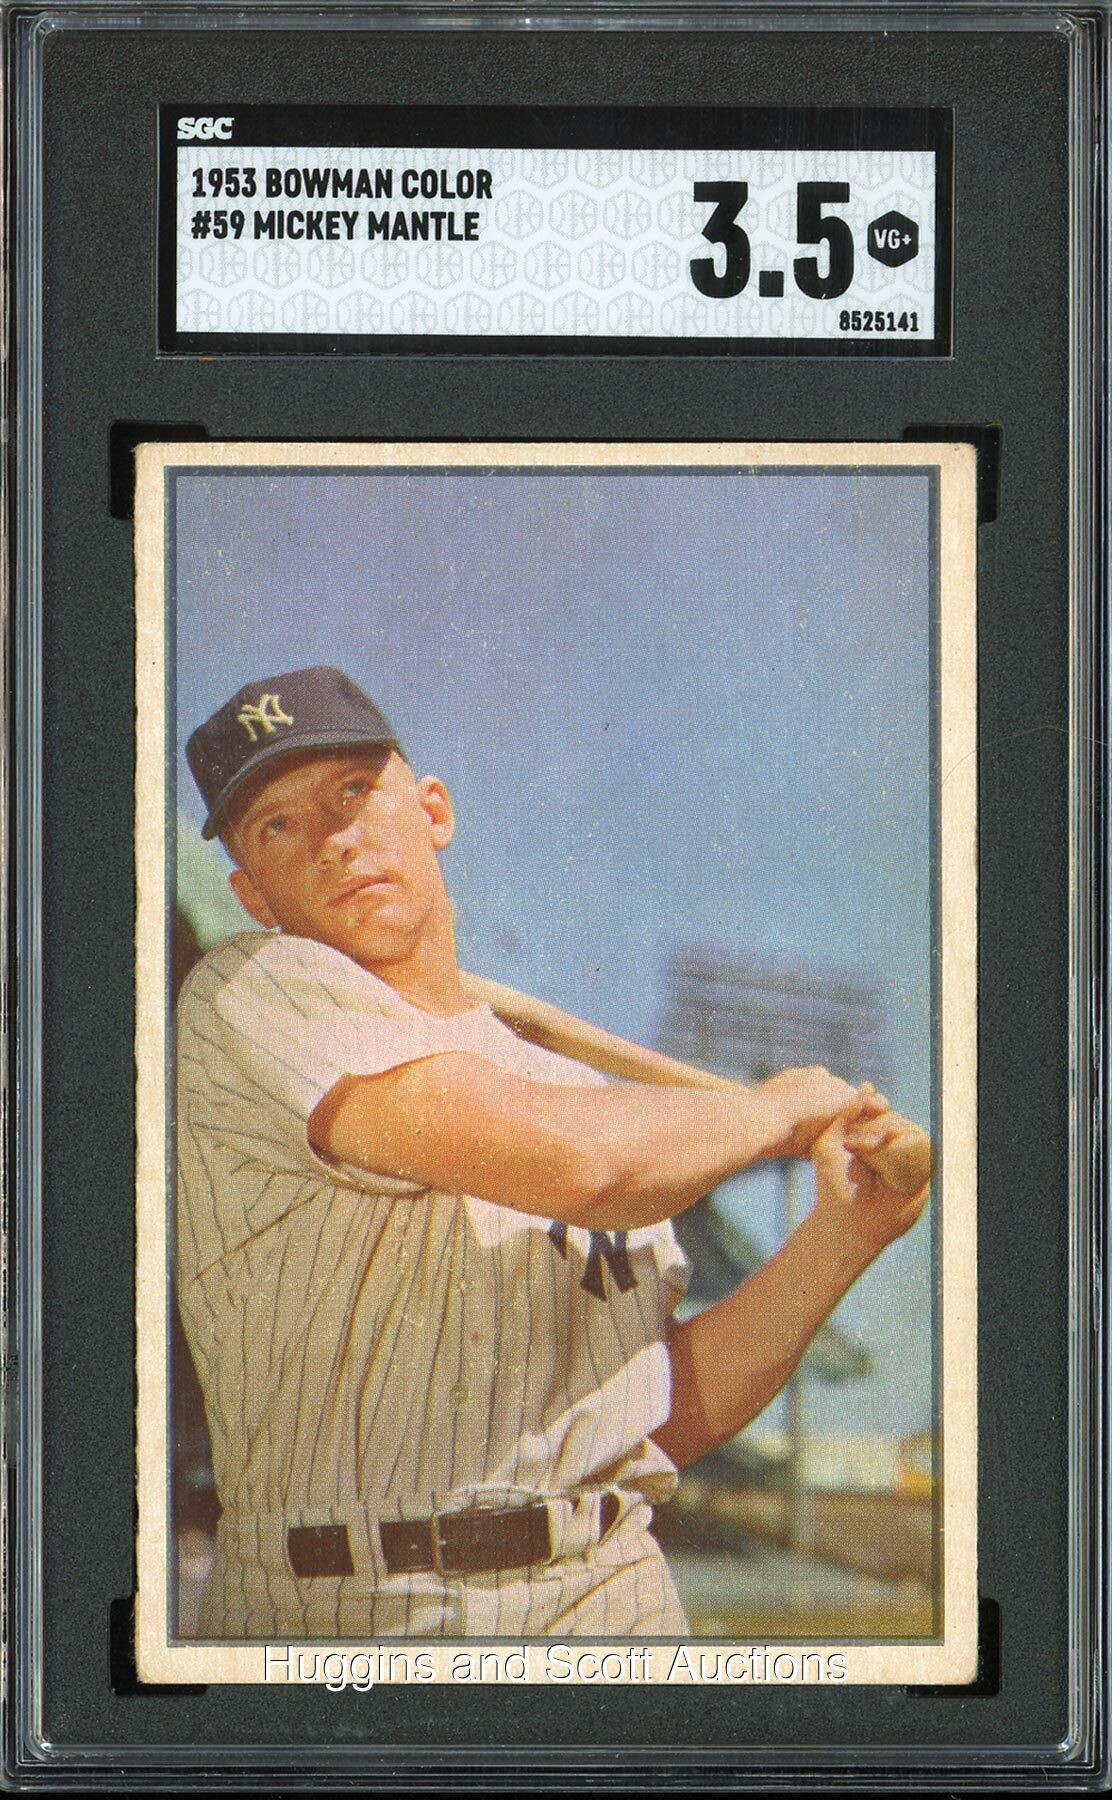 1953 Bowman Color #59 Mickey Mantle - SGC 3.5 VG+